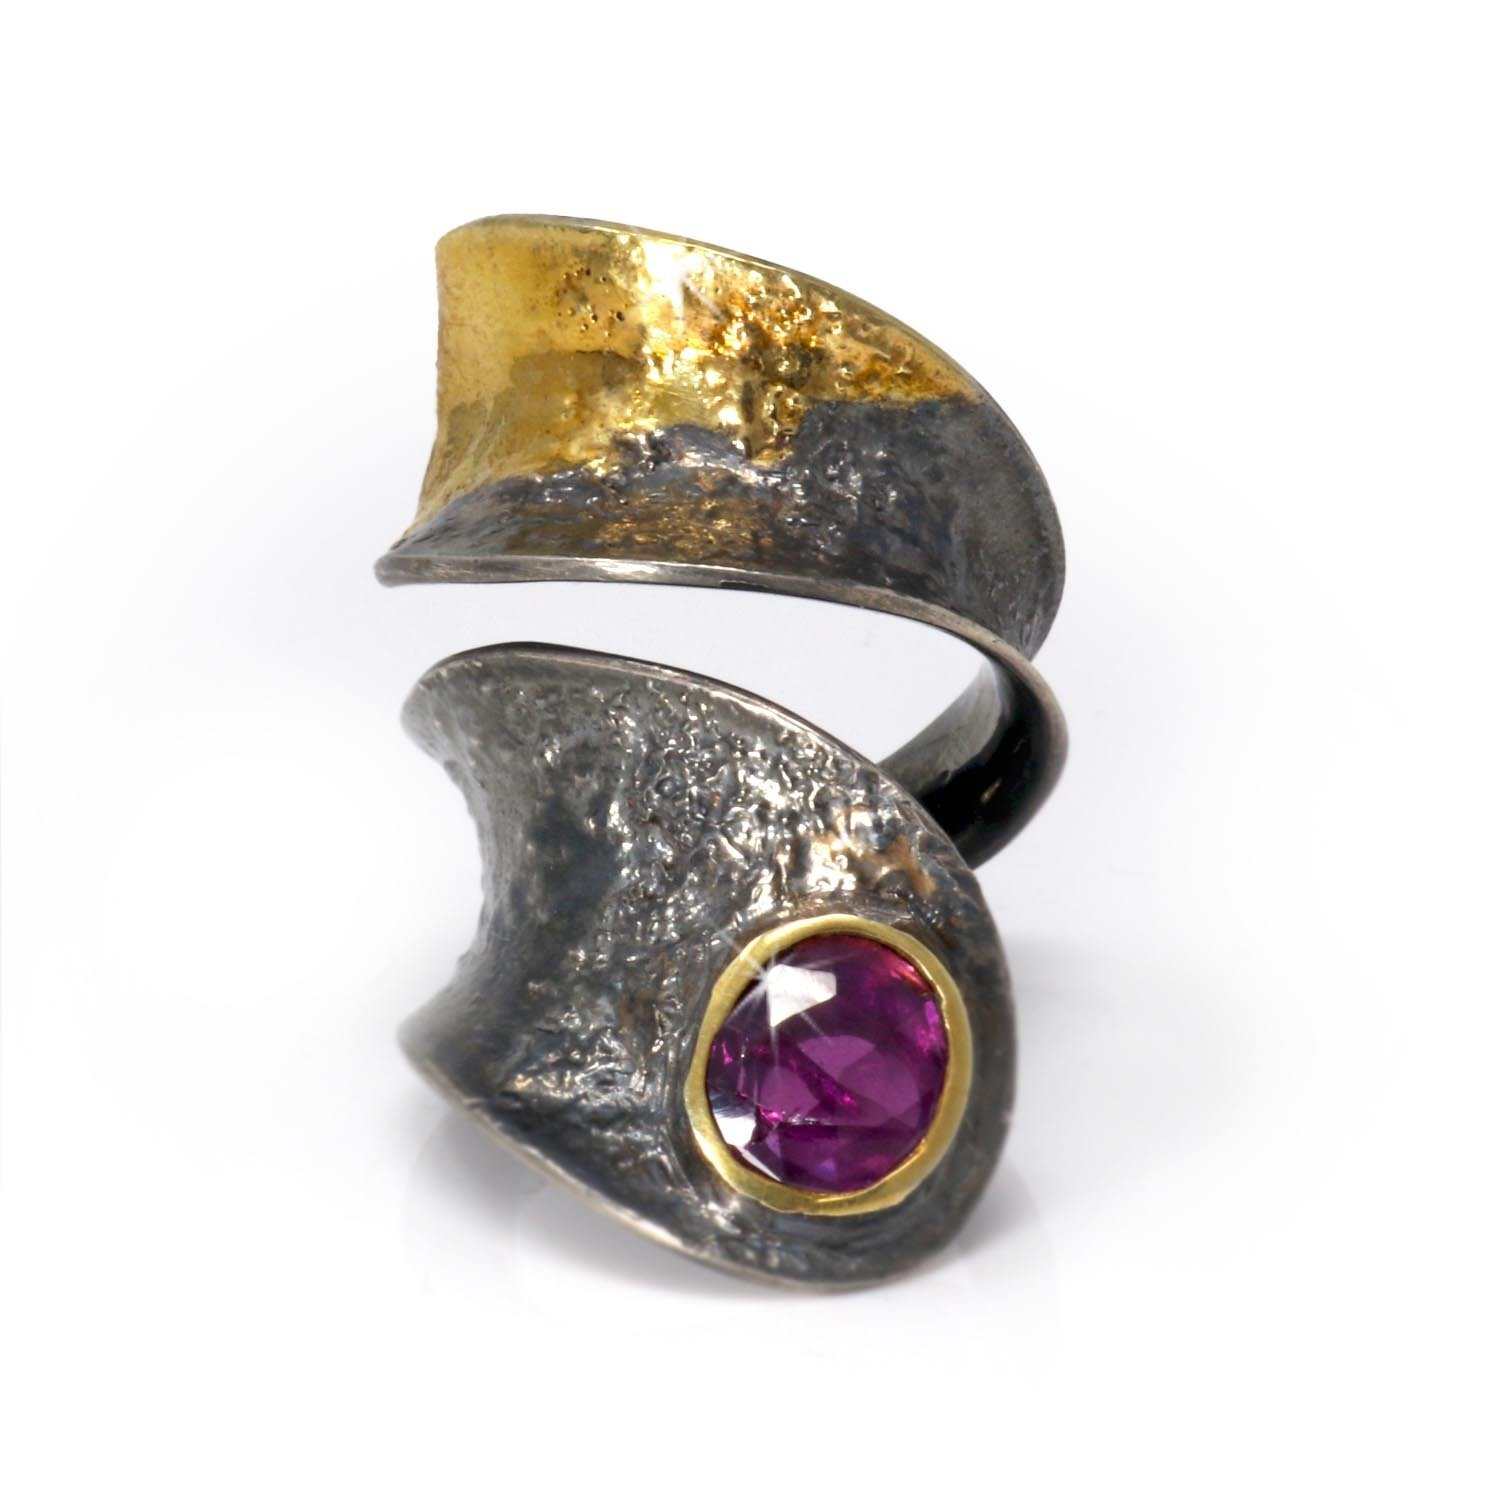 Faceted Pink Tourmaline Ring Size 8 - Freeform With Gold Vermeil Bezel On Swirling Contoured Oxidized Sterling Silver Band With Gold Leaf Accents